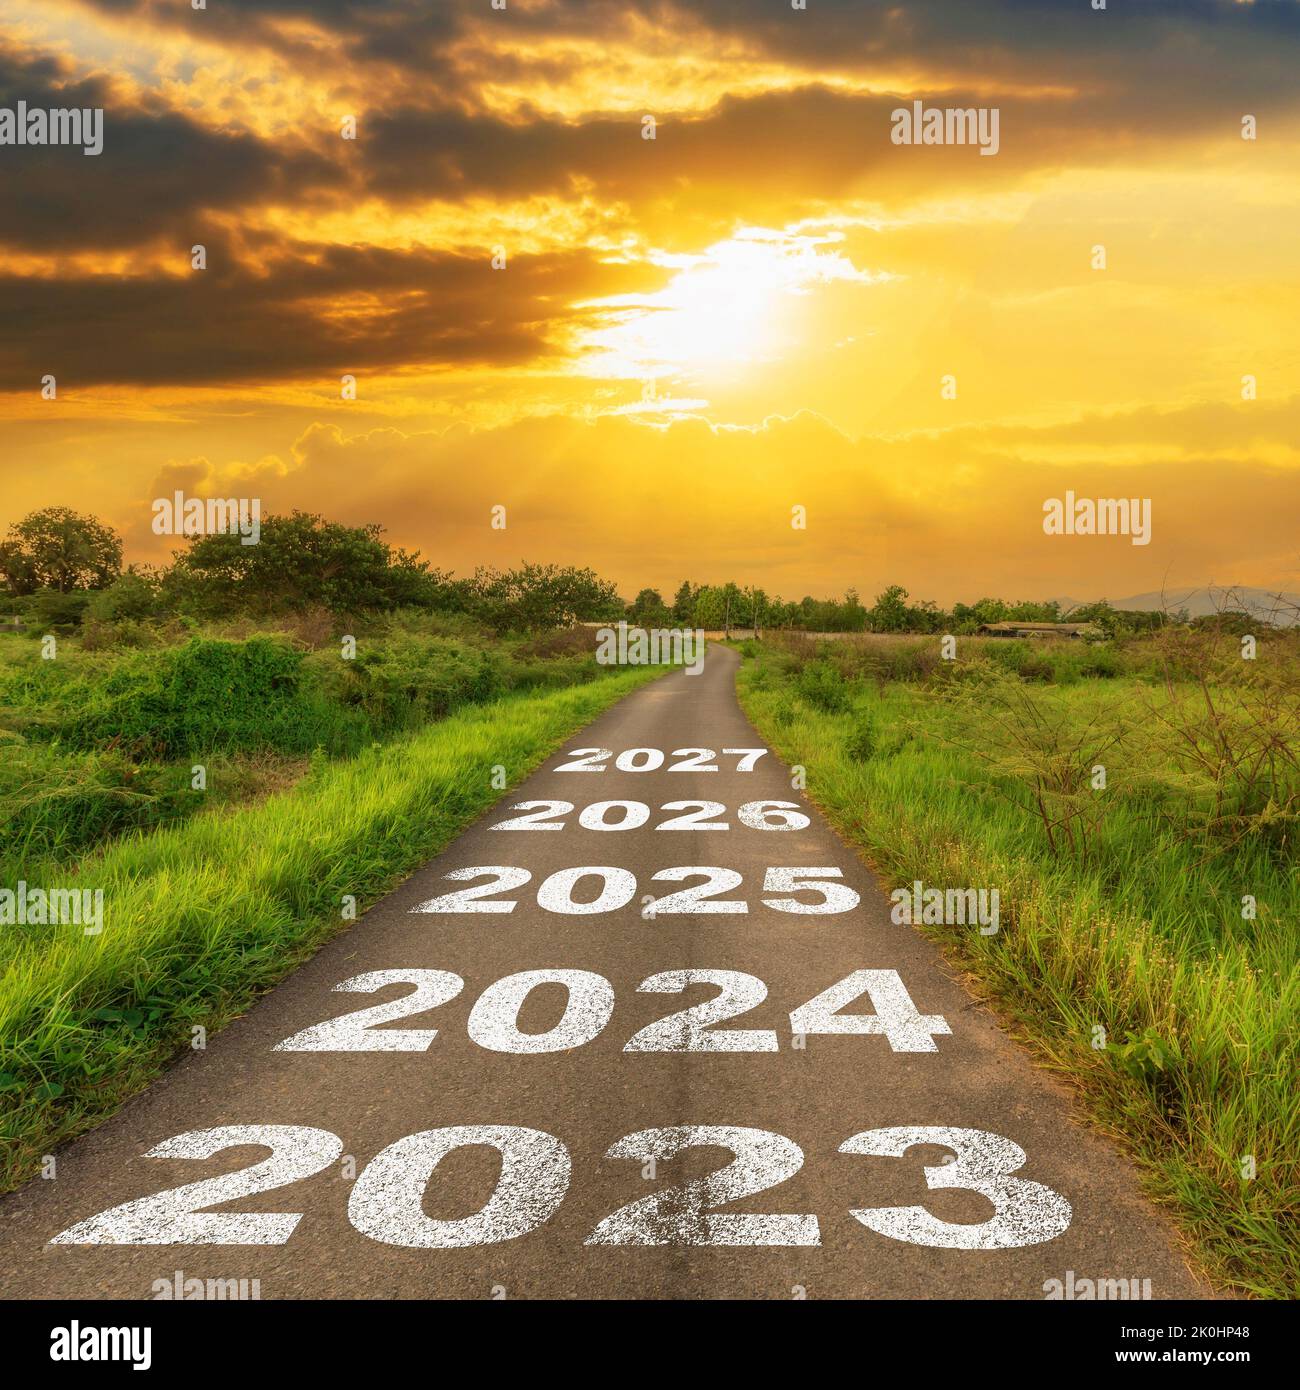 Empty asphalt road and New year 2023 concept. Driving on an empty road to 2023 with sunset. Stock Photo